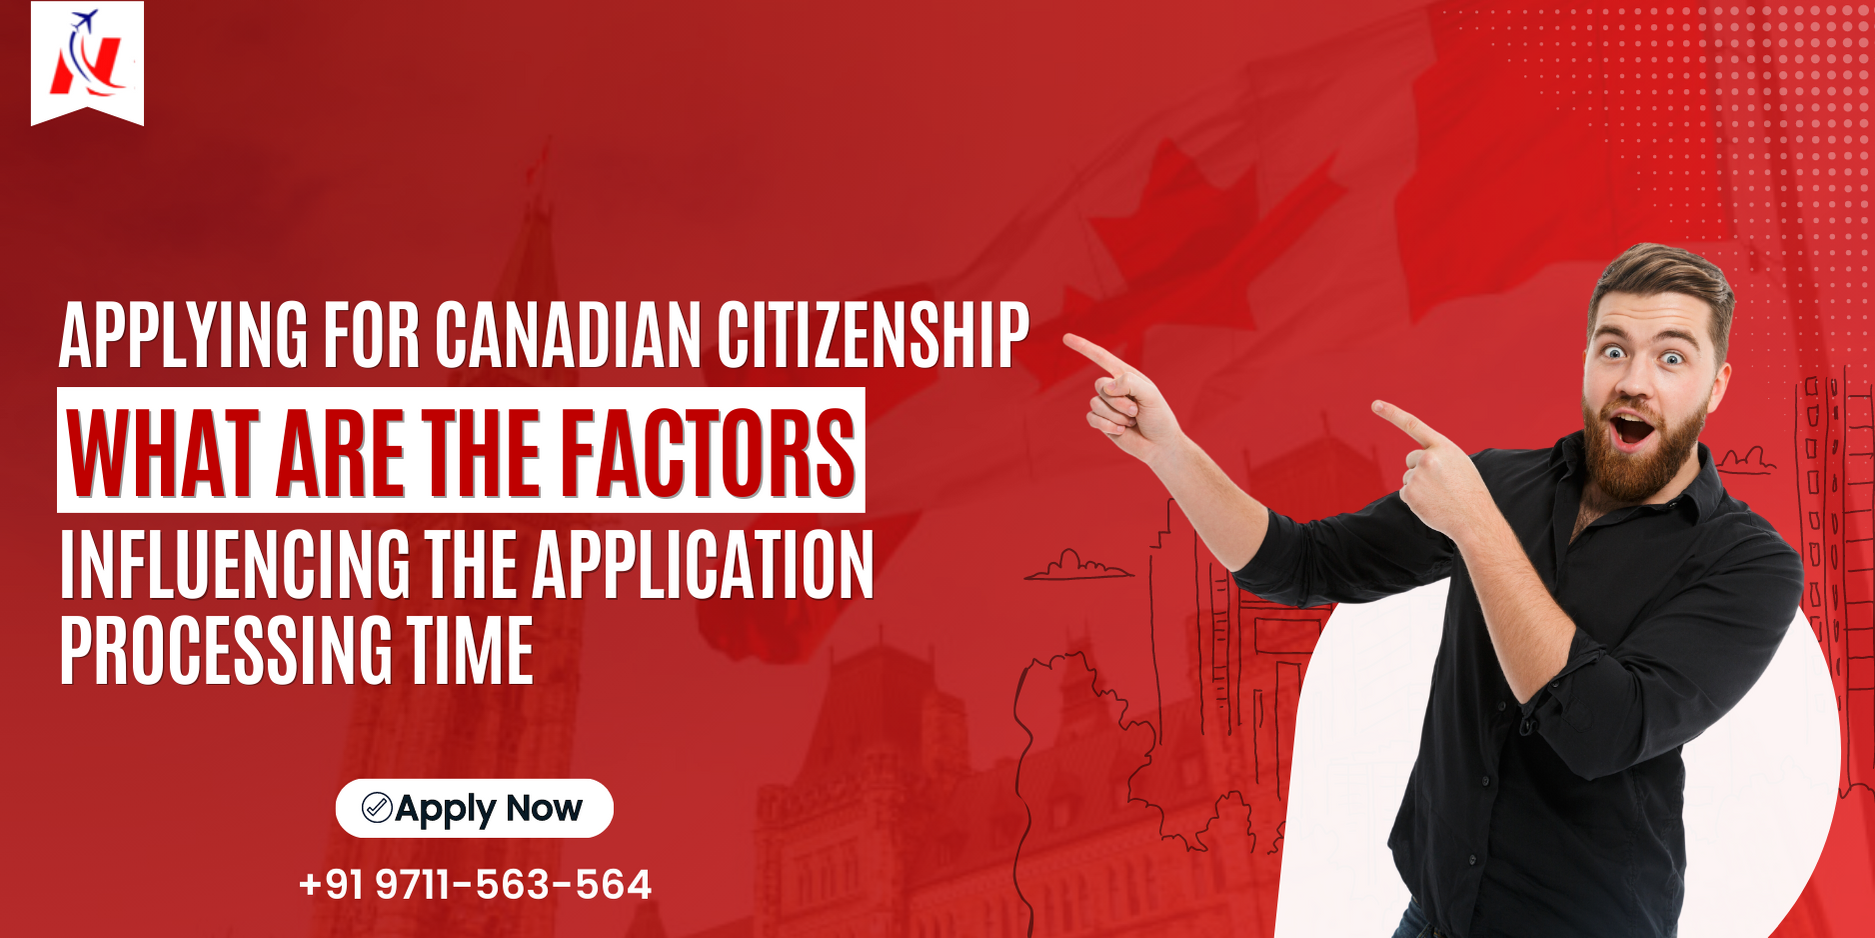 Applying for Canadian citizenship: What are the factors influencing the application processing time?